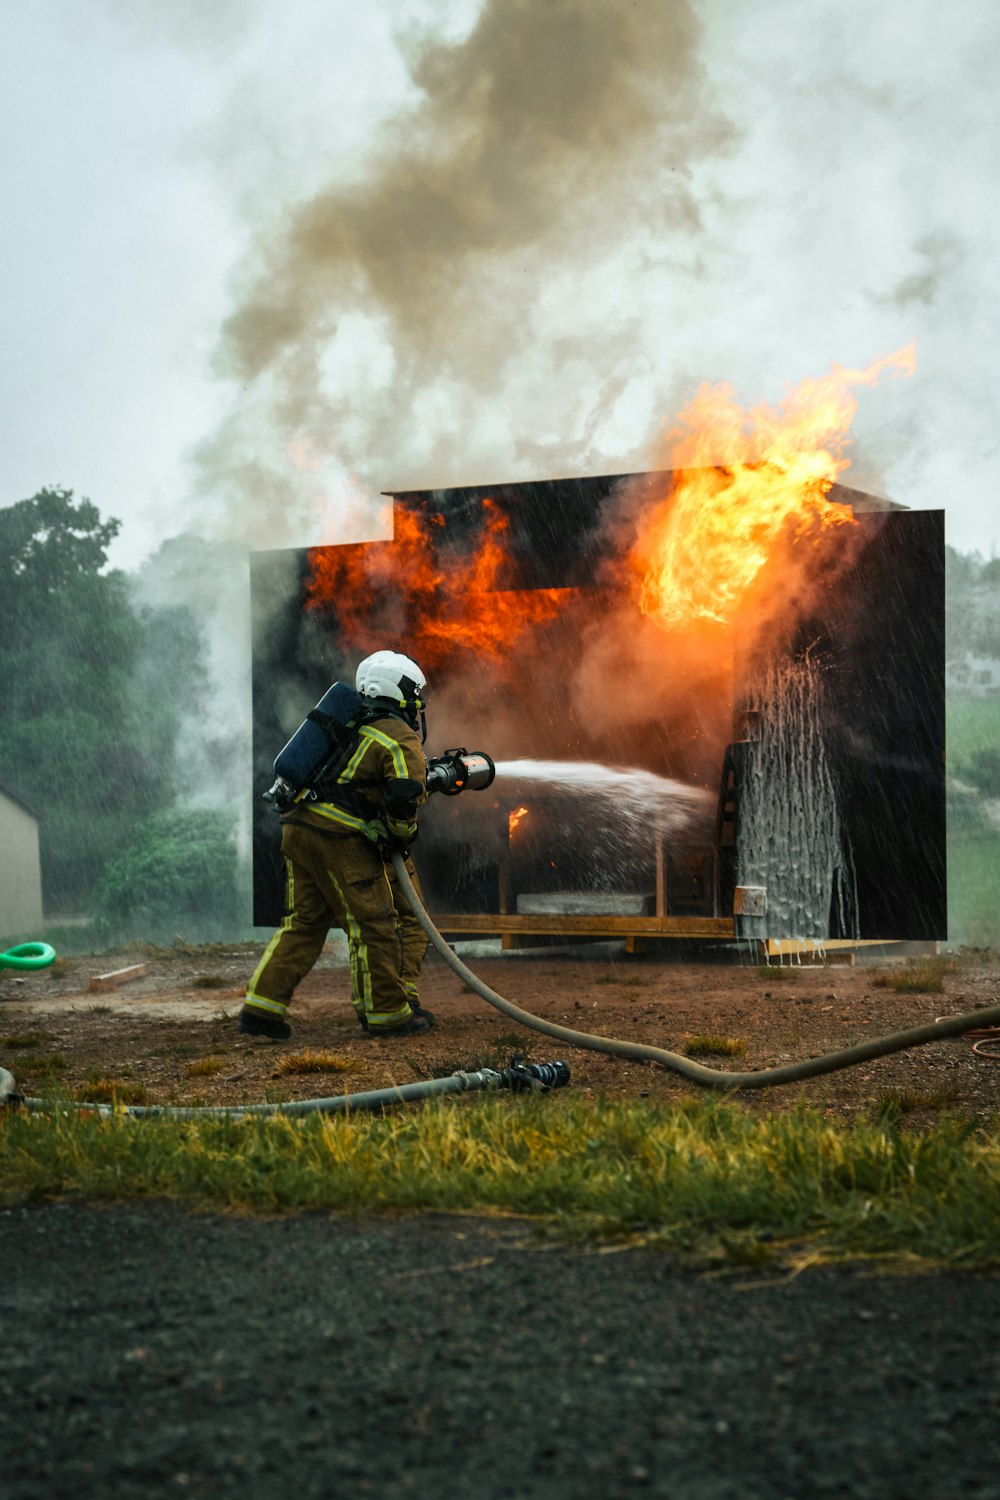 a firefighter is using a hose to extinguish a fire